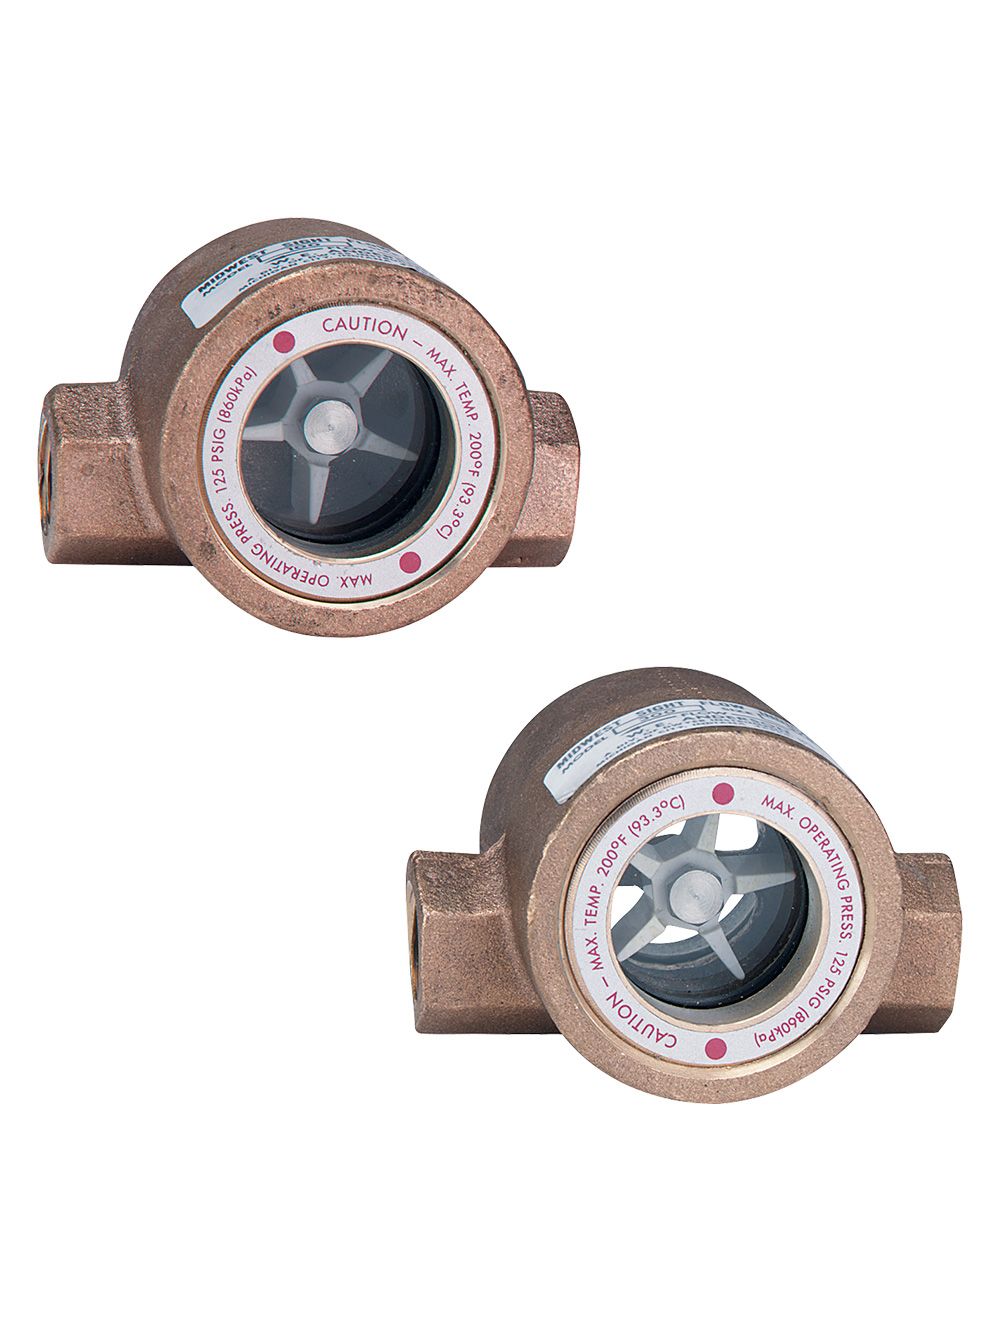 4 Length x 2.250 Depth x 2.563 Height 3/4 Female NPT Connections Dwyer Midwest Series SFI-100 Sight Flow Indicator ABS Impeller Bronze Body Single Window 